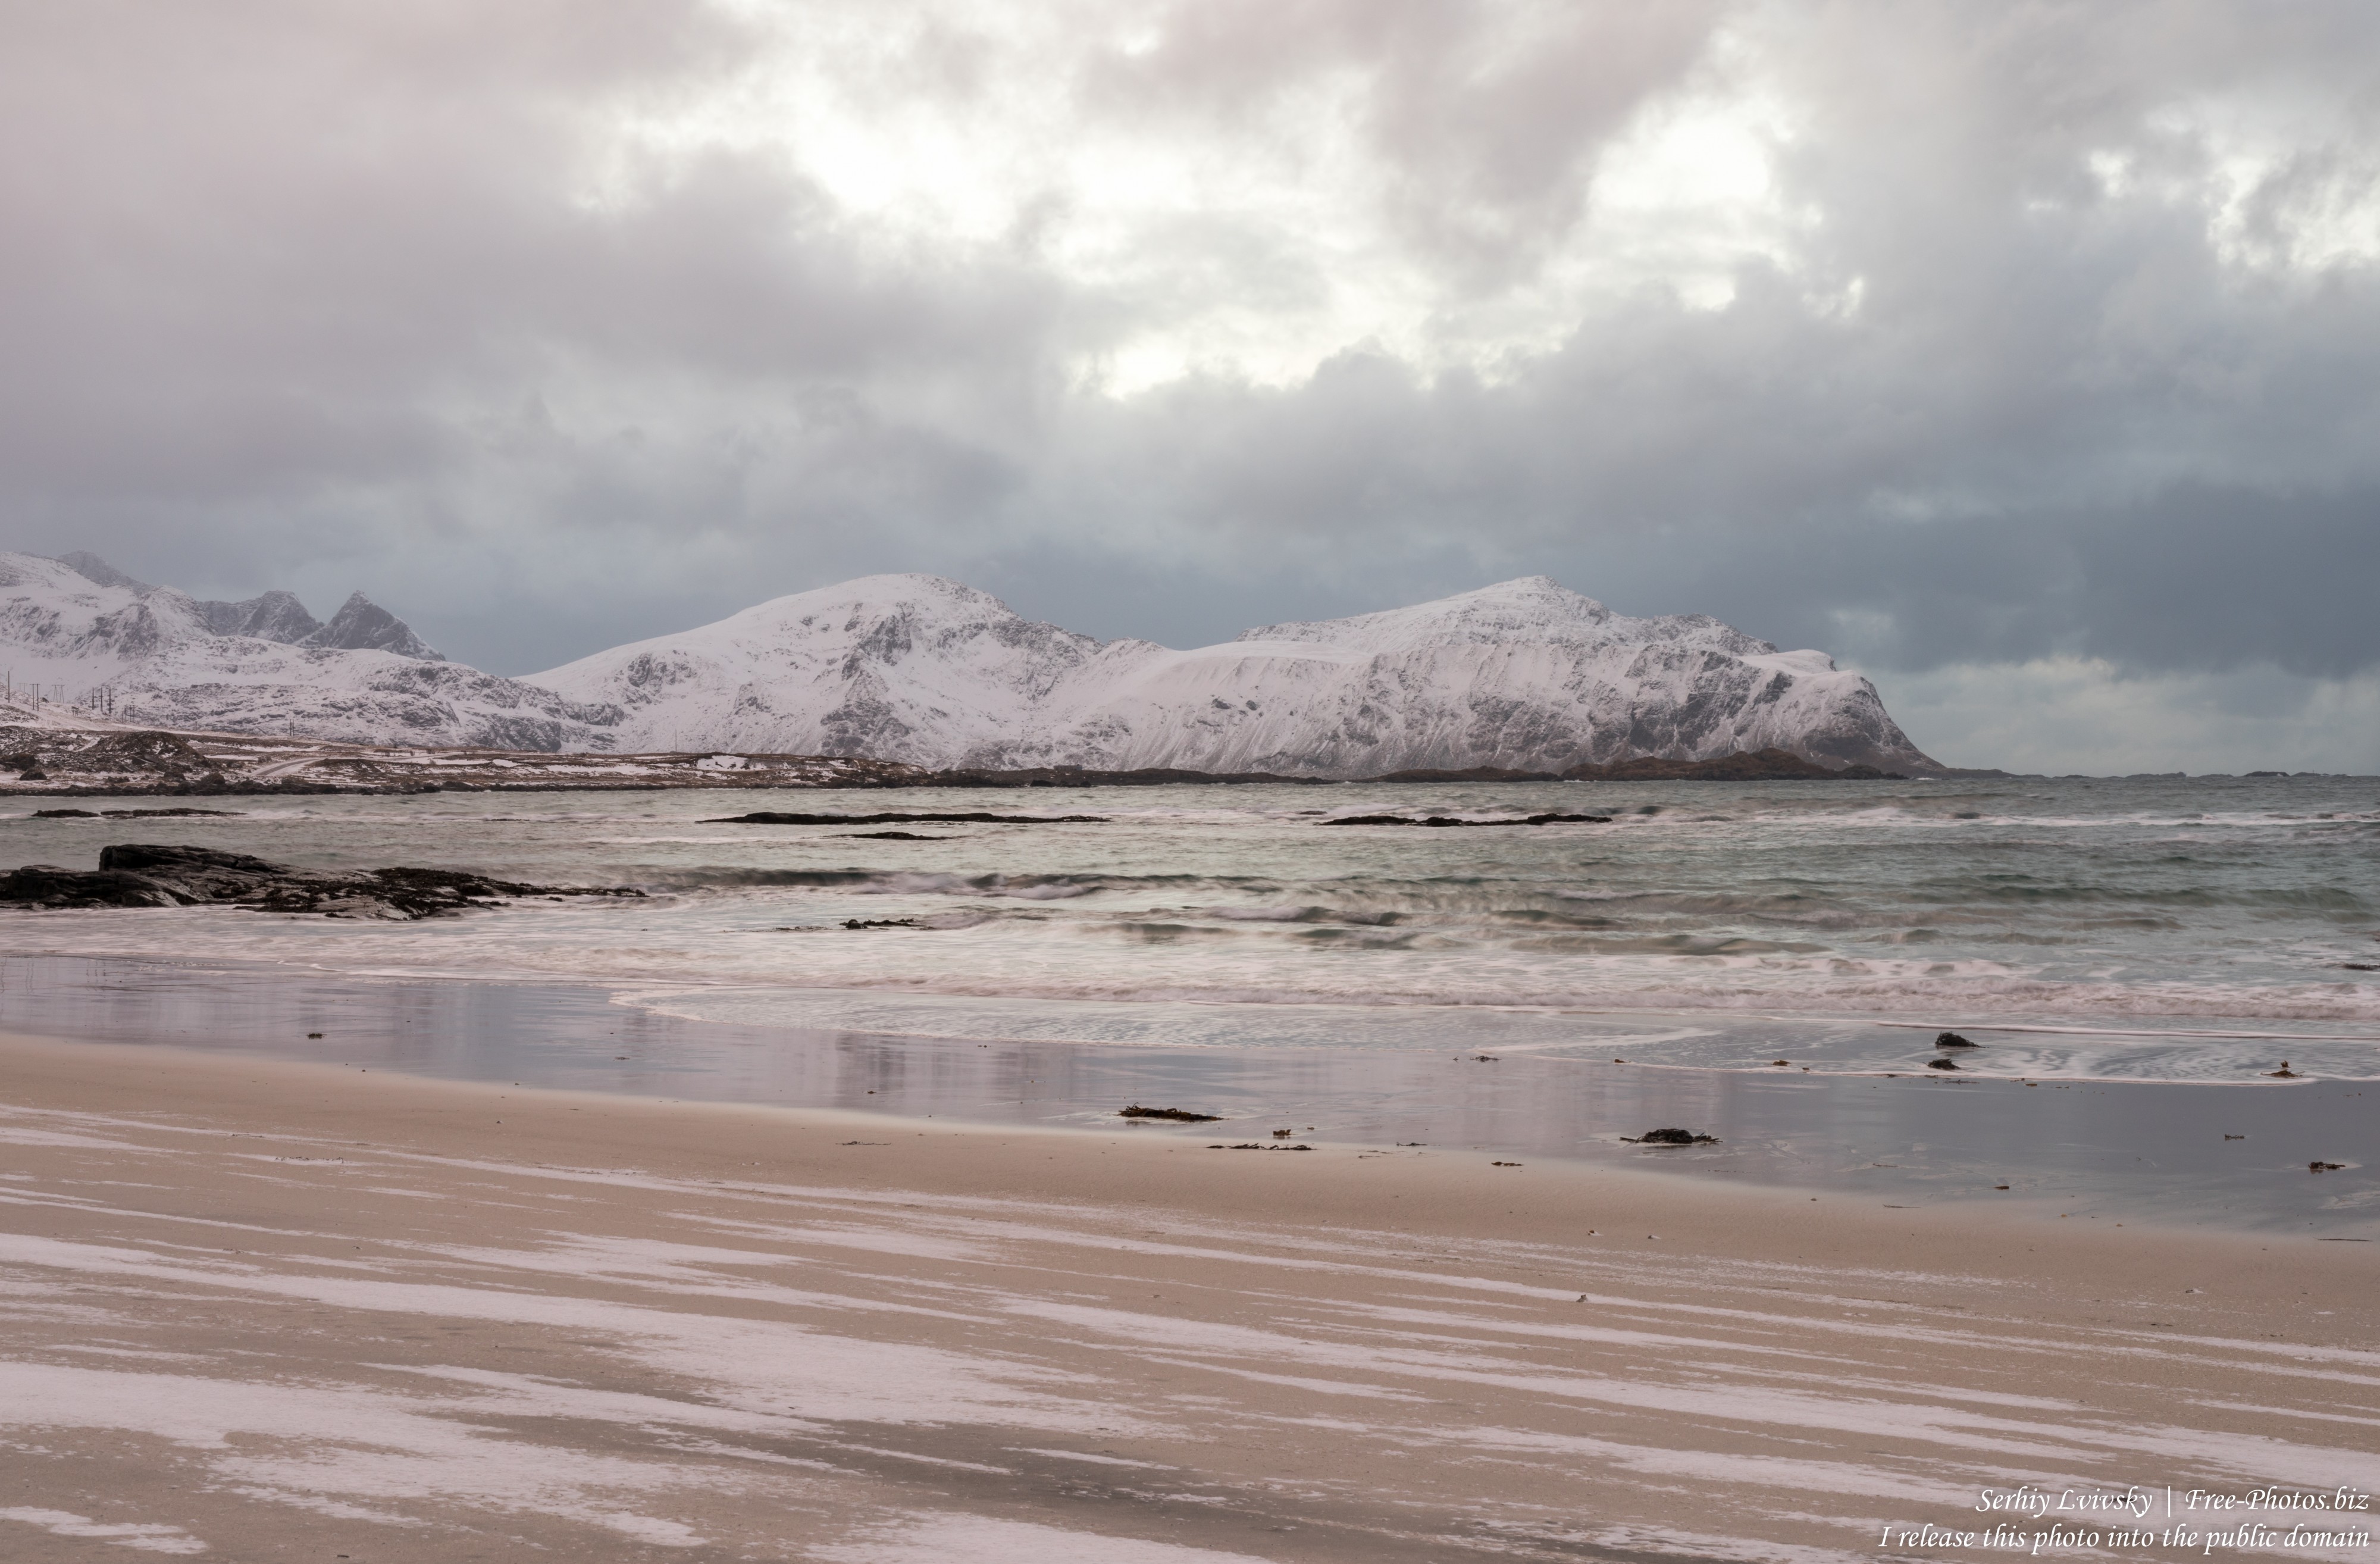 Skagsanden beach, Norway, photographed in February 2020 by Serhiy Lvivsky, picture 8